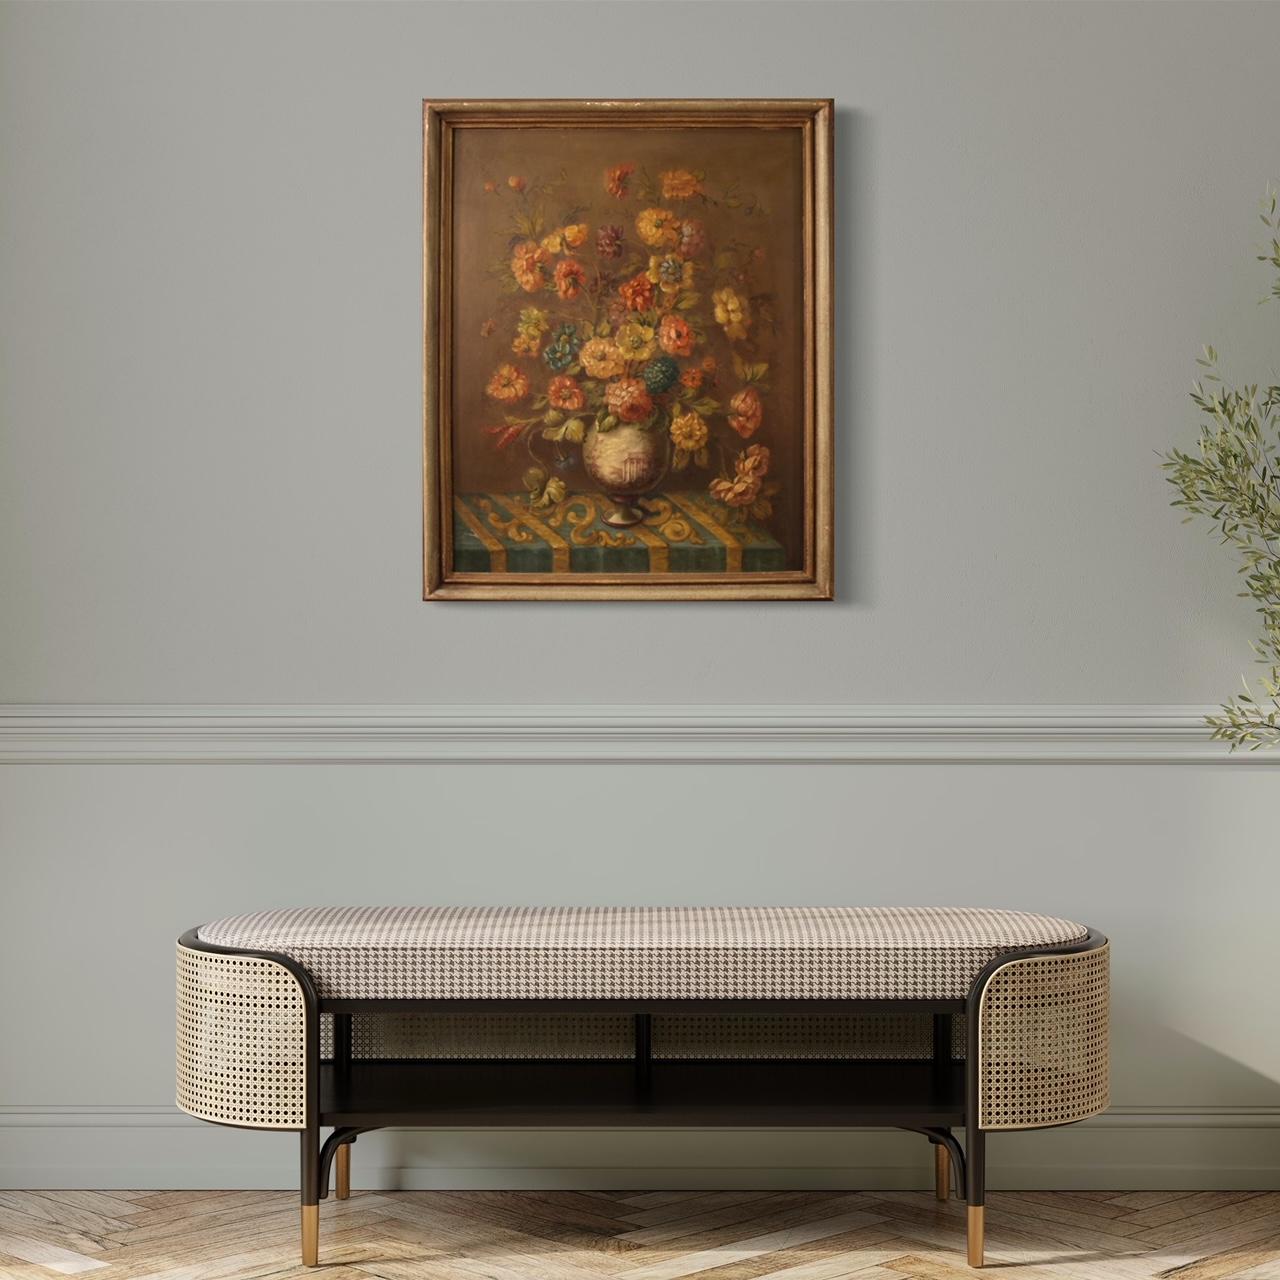 Italian painting from the mid-20th century. Artwork oil on masonite depicting an elegant still life, vase with flowers, of good pictorial quality. Painting of good size and pleasant decor adorned with a lacquered wooden frame with some small signs